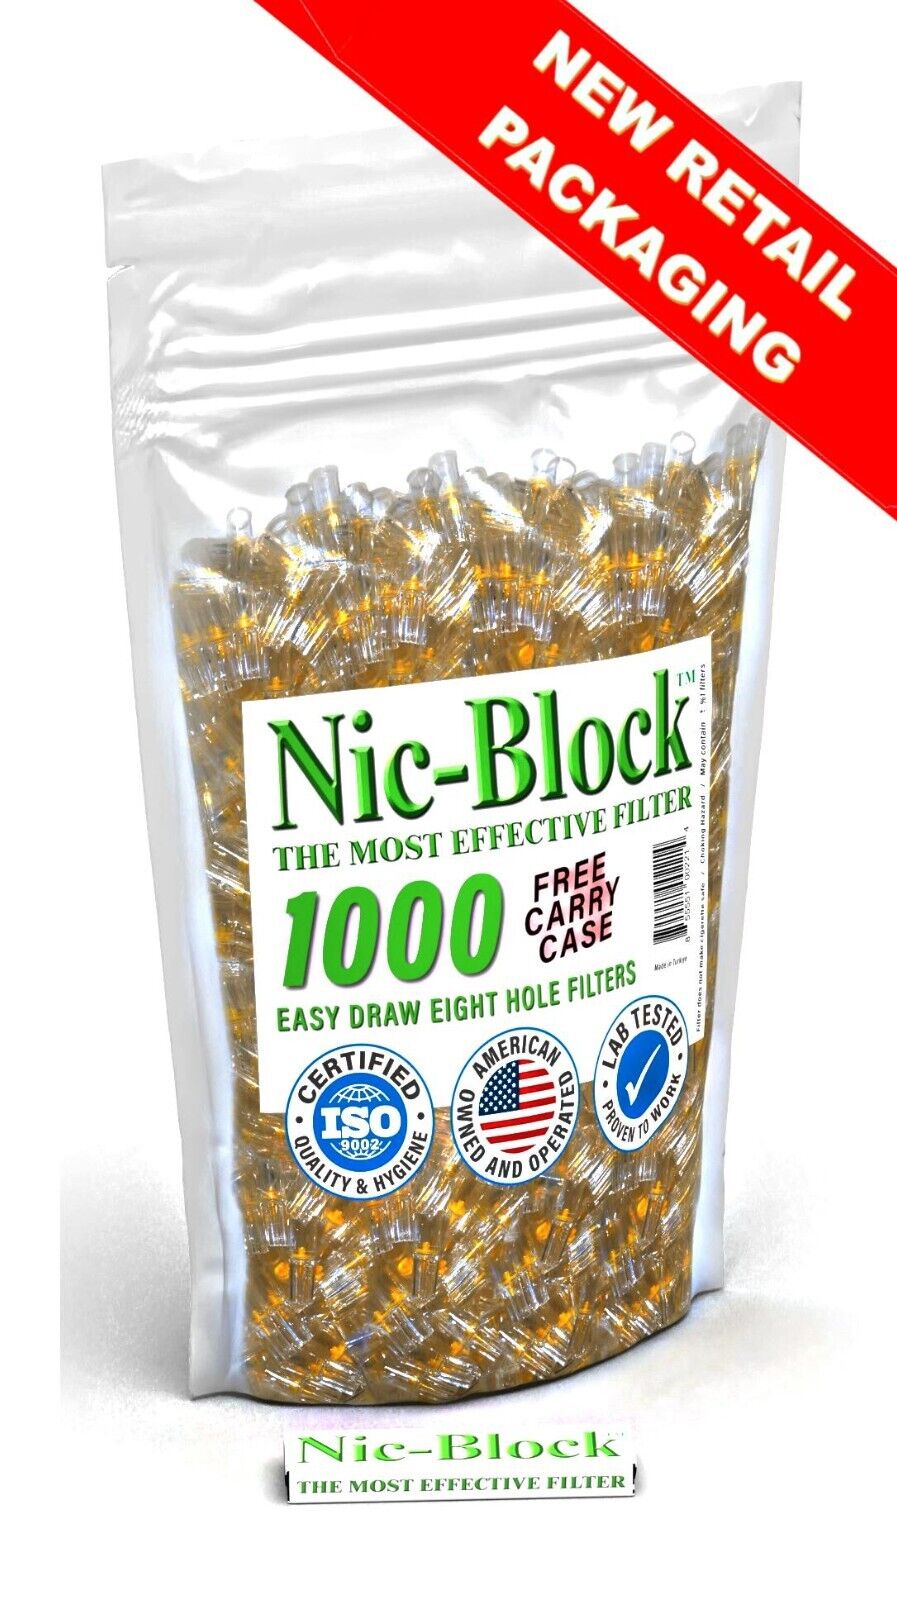 NIC-BLOCK  Cigarette Filters Bulk Wholesale 1000 FILTERS TIPS & FREE CARRY CASE